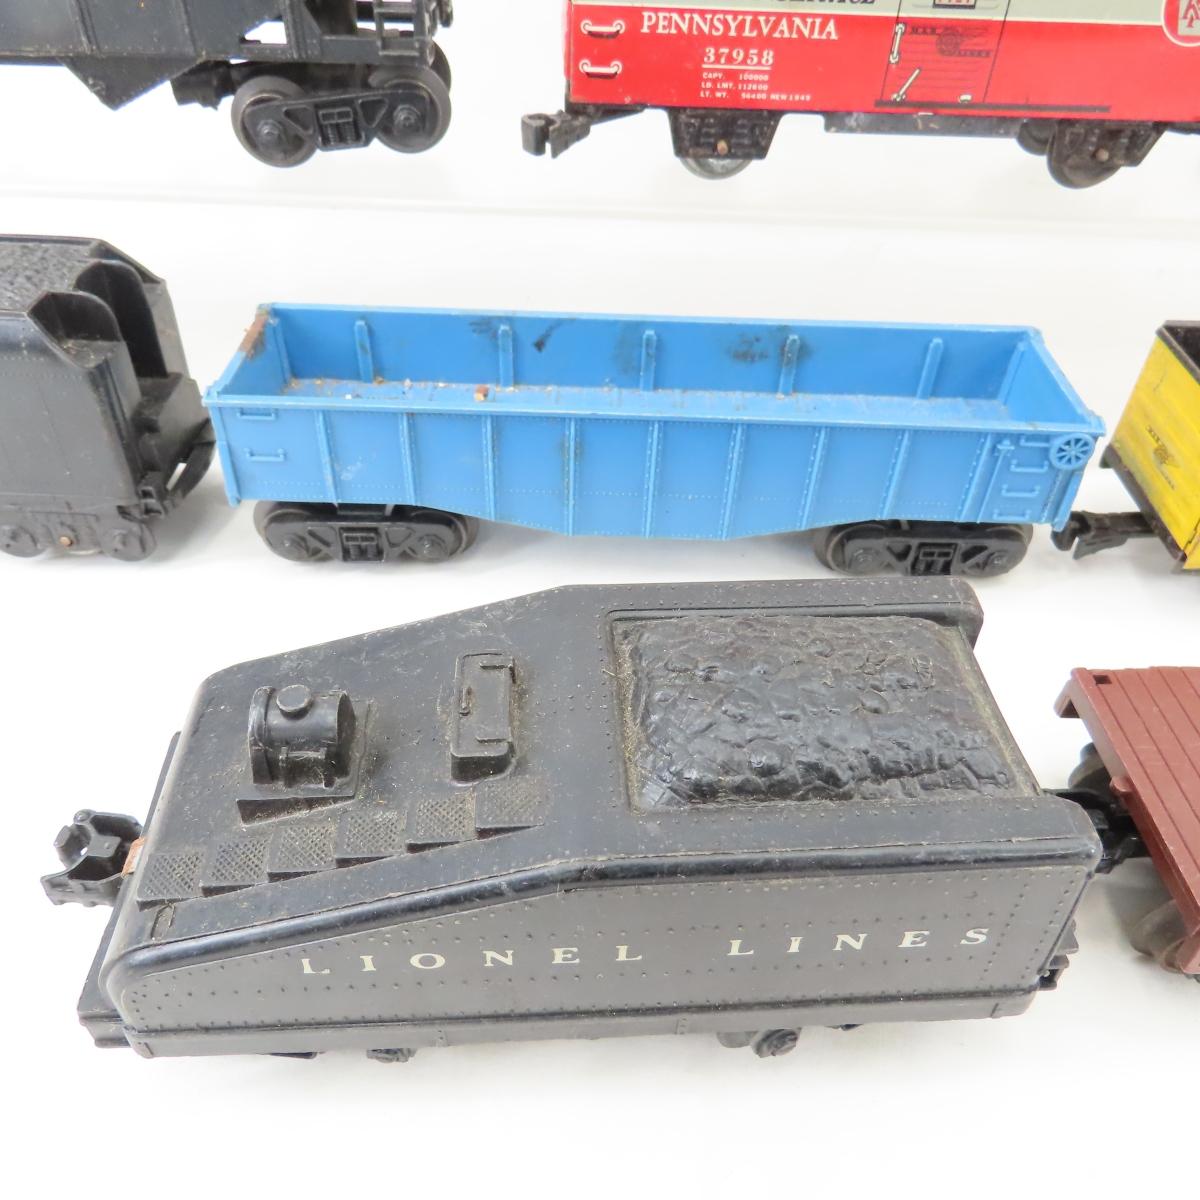 Lionel 1061 &400 engines, other cars and more